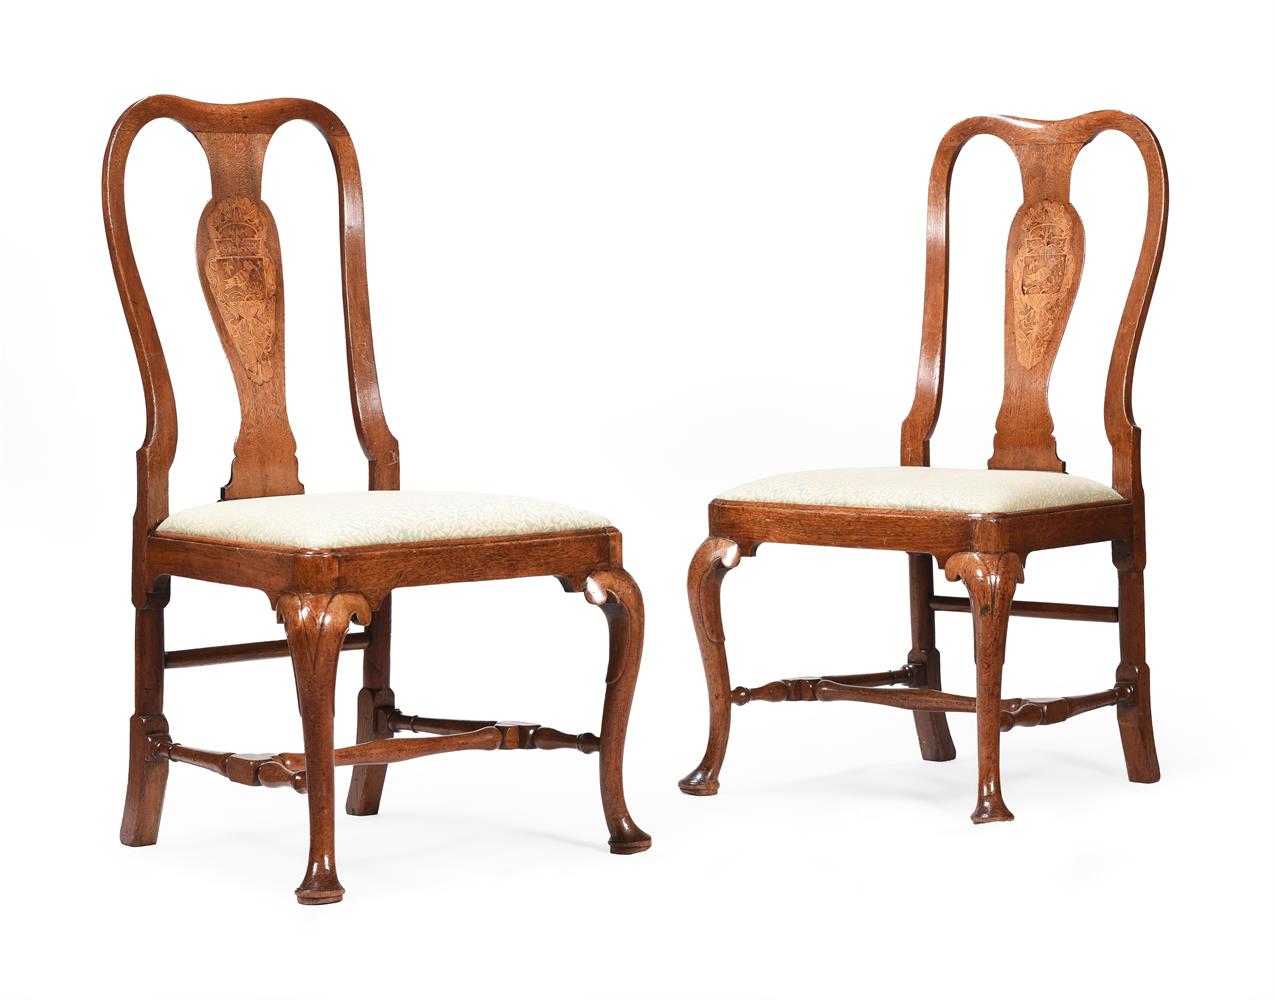 A SET OF FOUR GEORGE II WALNUT AND MARQUETRY DINING CHAIRS, CIRCA 1730 - Image 2 of 6